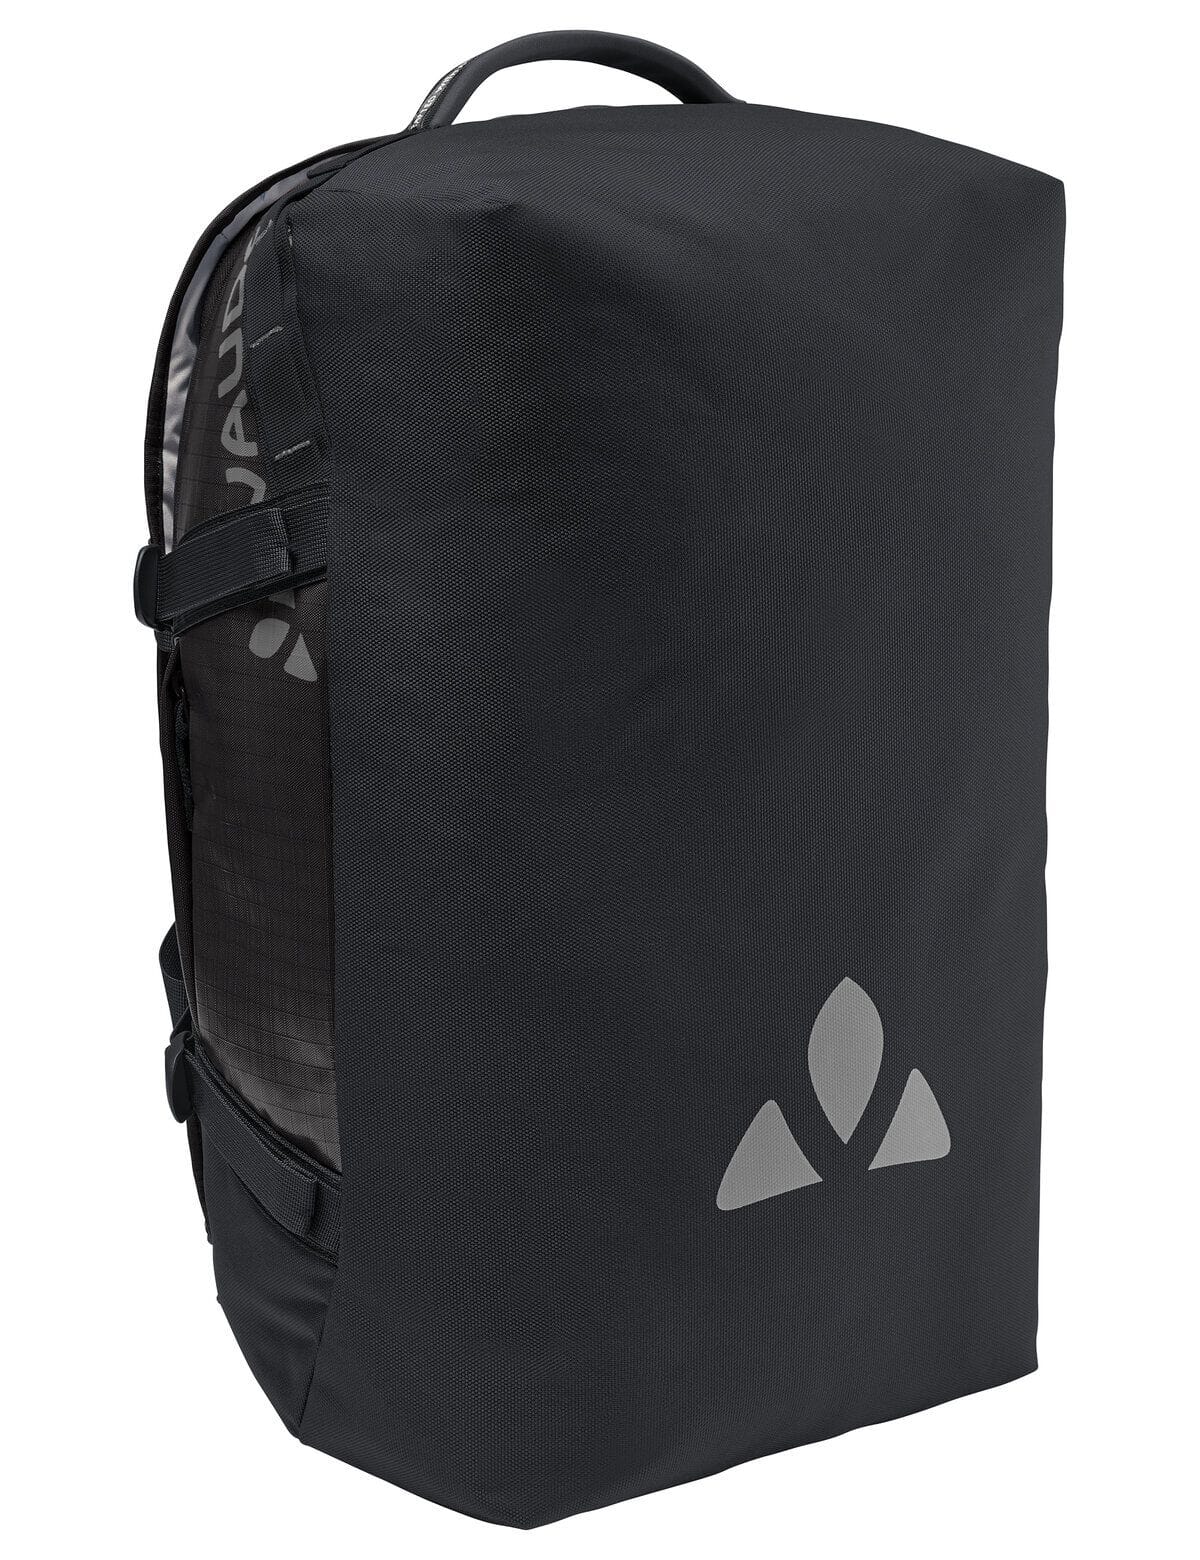 Vaude CityDuffel 35l - Recycled Polyamide & Recycled Polyester Black Bags